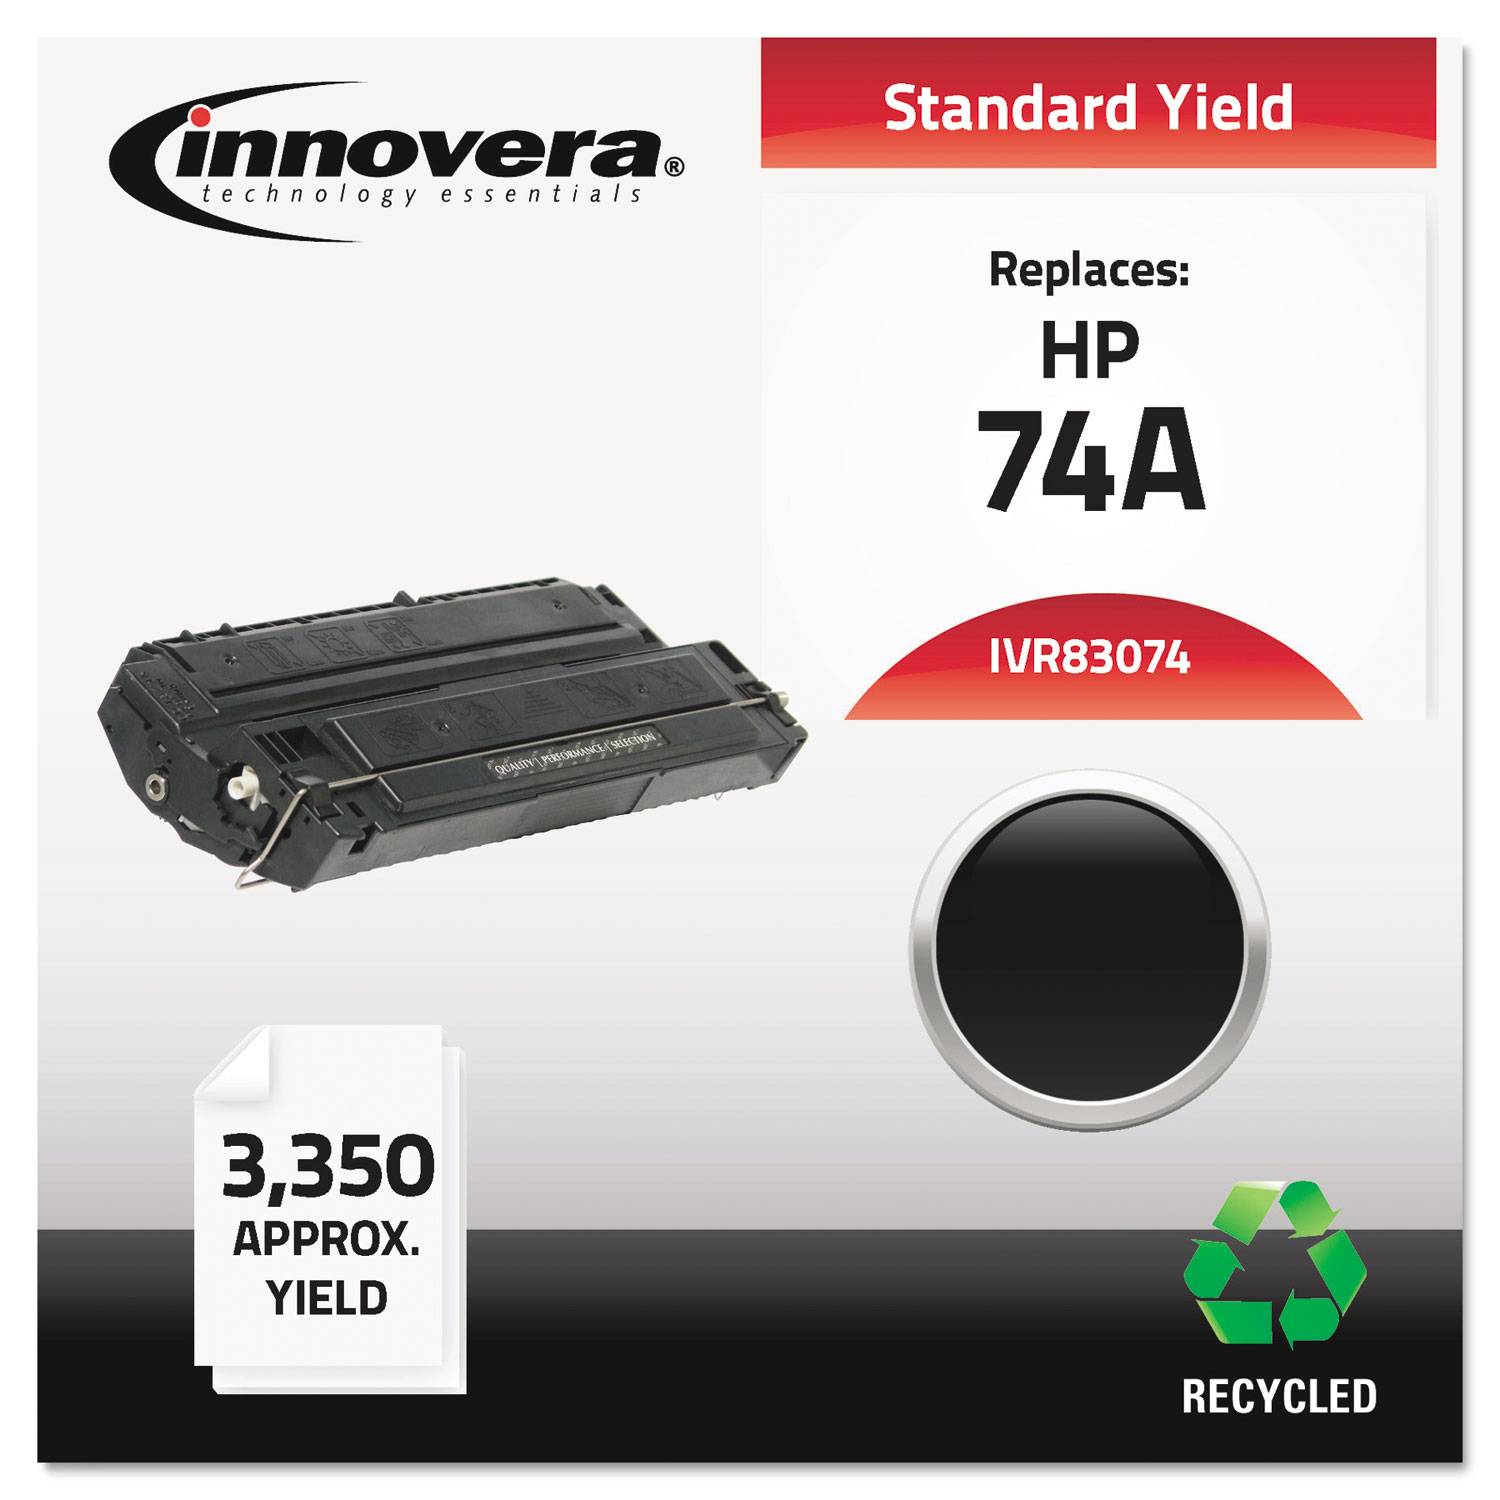  Innovera IVR83074 Remanufactured 92274A (74A) Toner, 3350 Page-Yield, Black (IVR83074) 